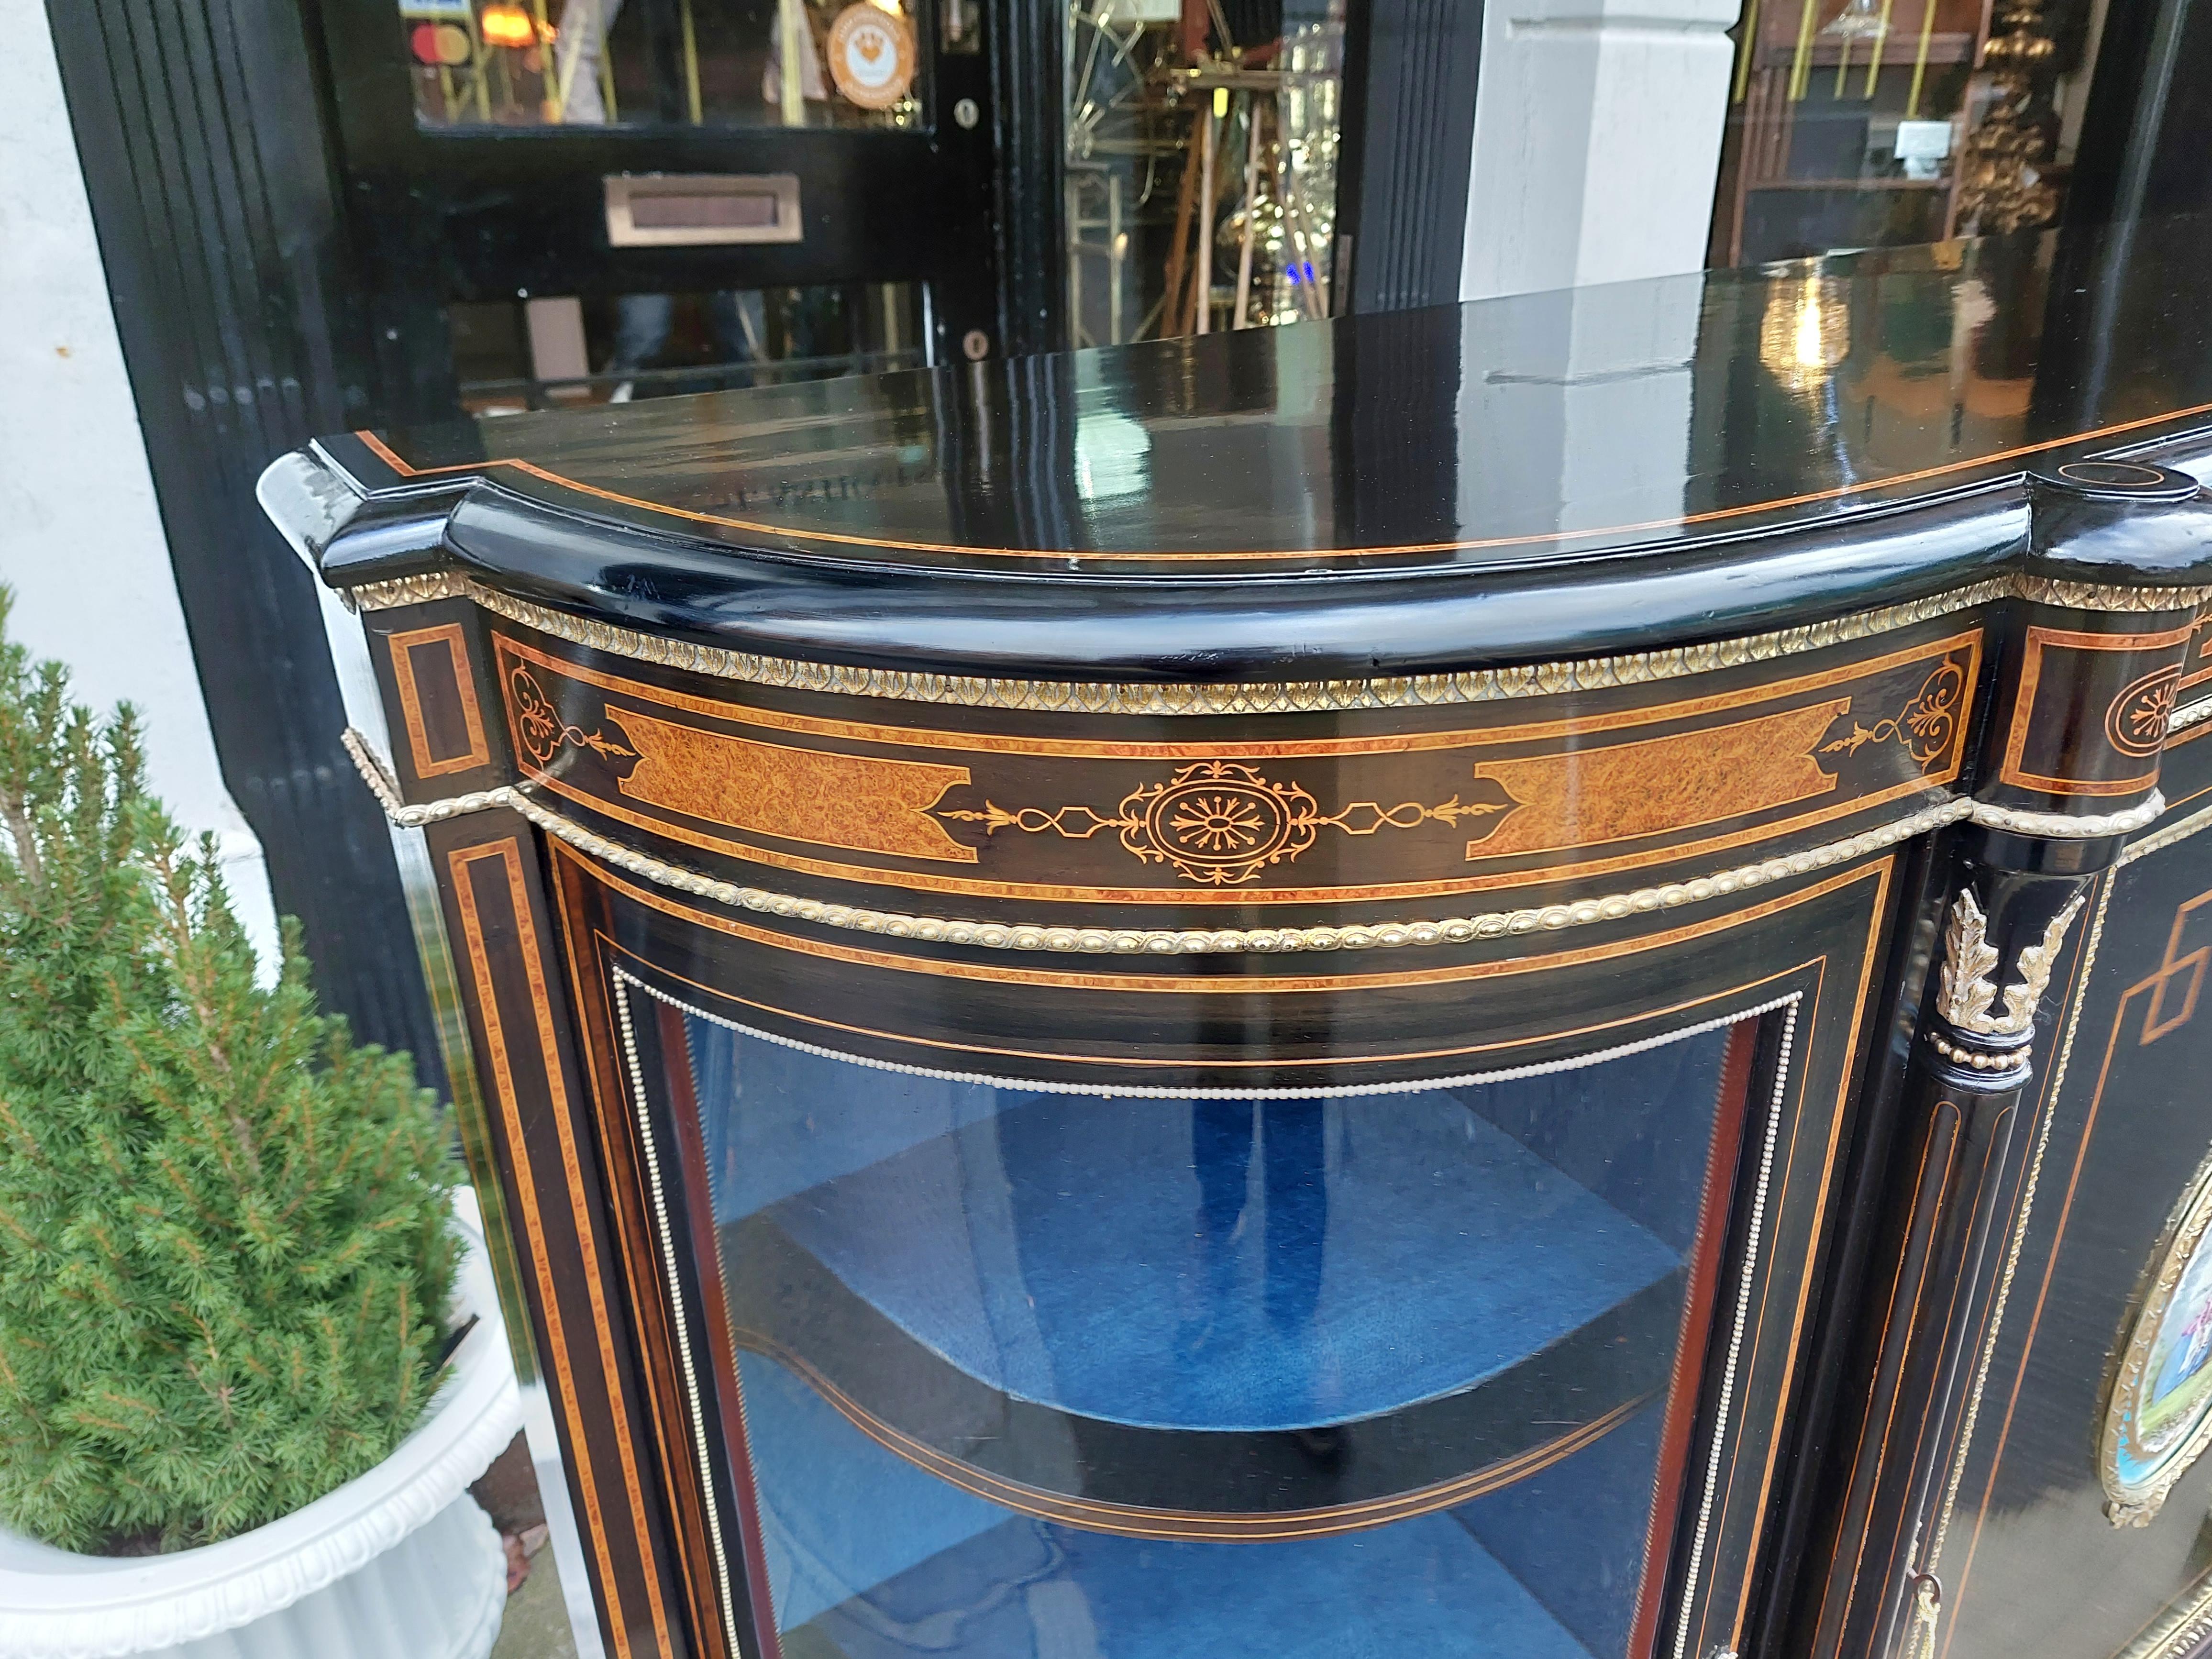 Victorian Walnut, Ebonized & Marquetry  Inlaid Credenza - The side cabinet with central door centered with a porcelain plaque painted with a courting couple, flanked by turned columns and convex glazed doors - 65